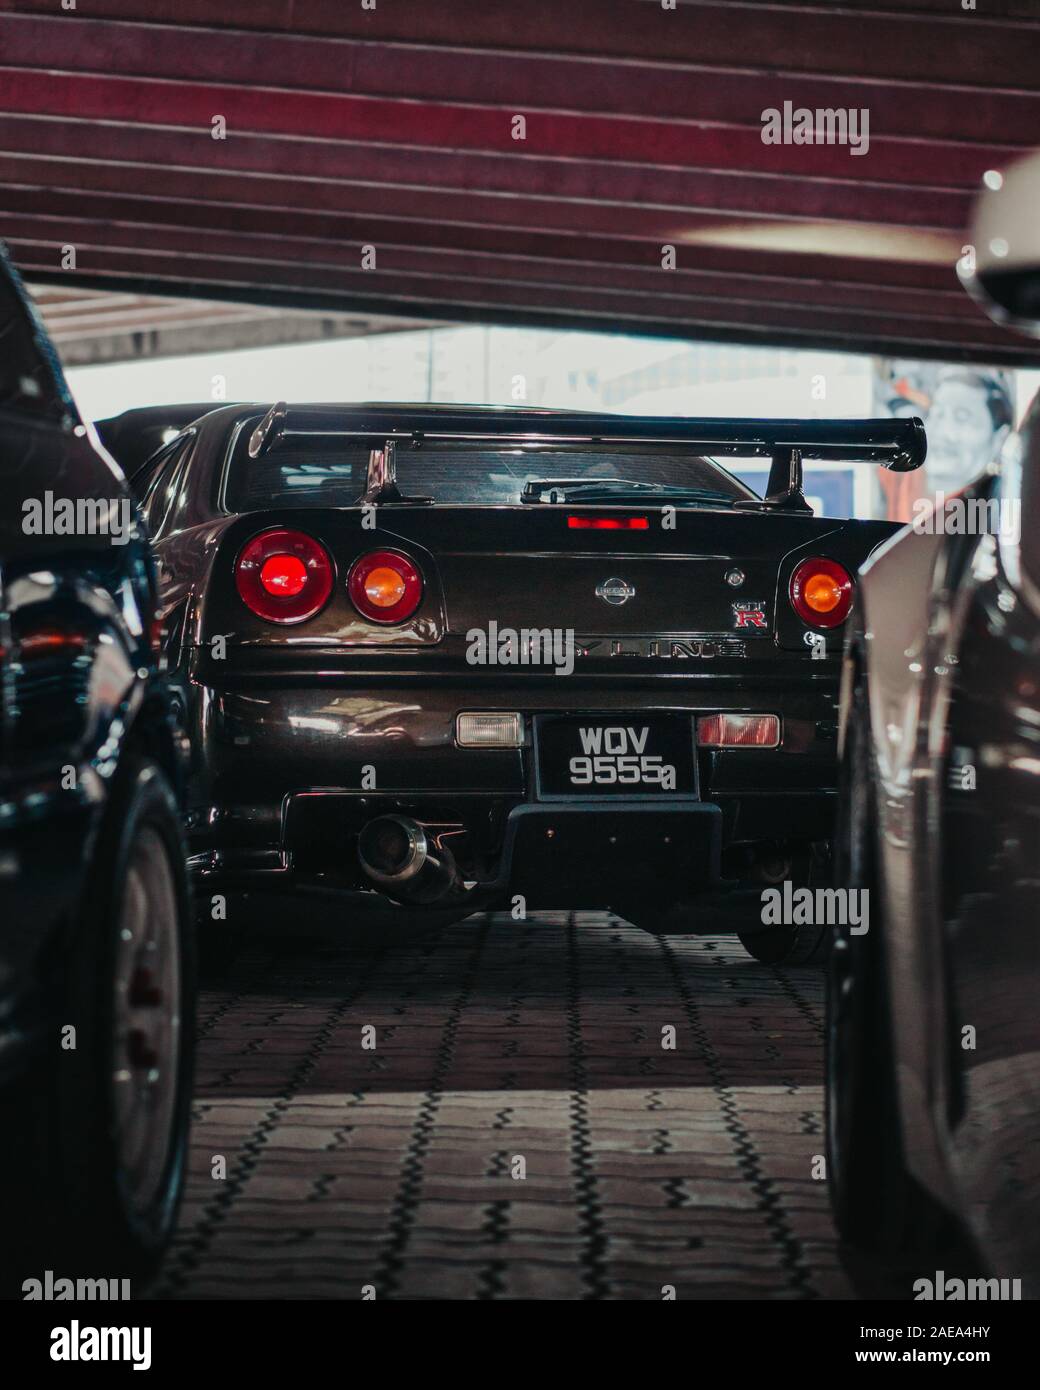 Nissan Skyline Gtr R34 In Youth Automotive Culture In Shah Alam Malaysia Stock Photo Alamy